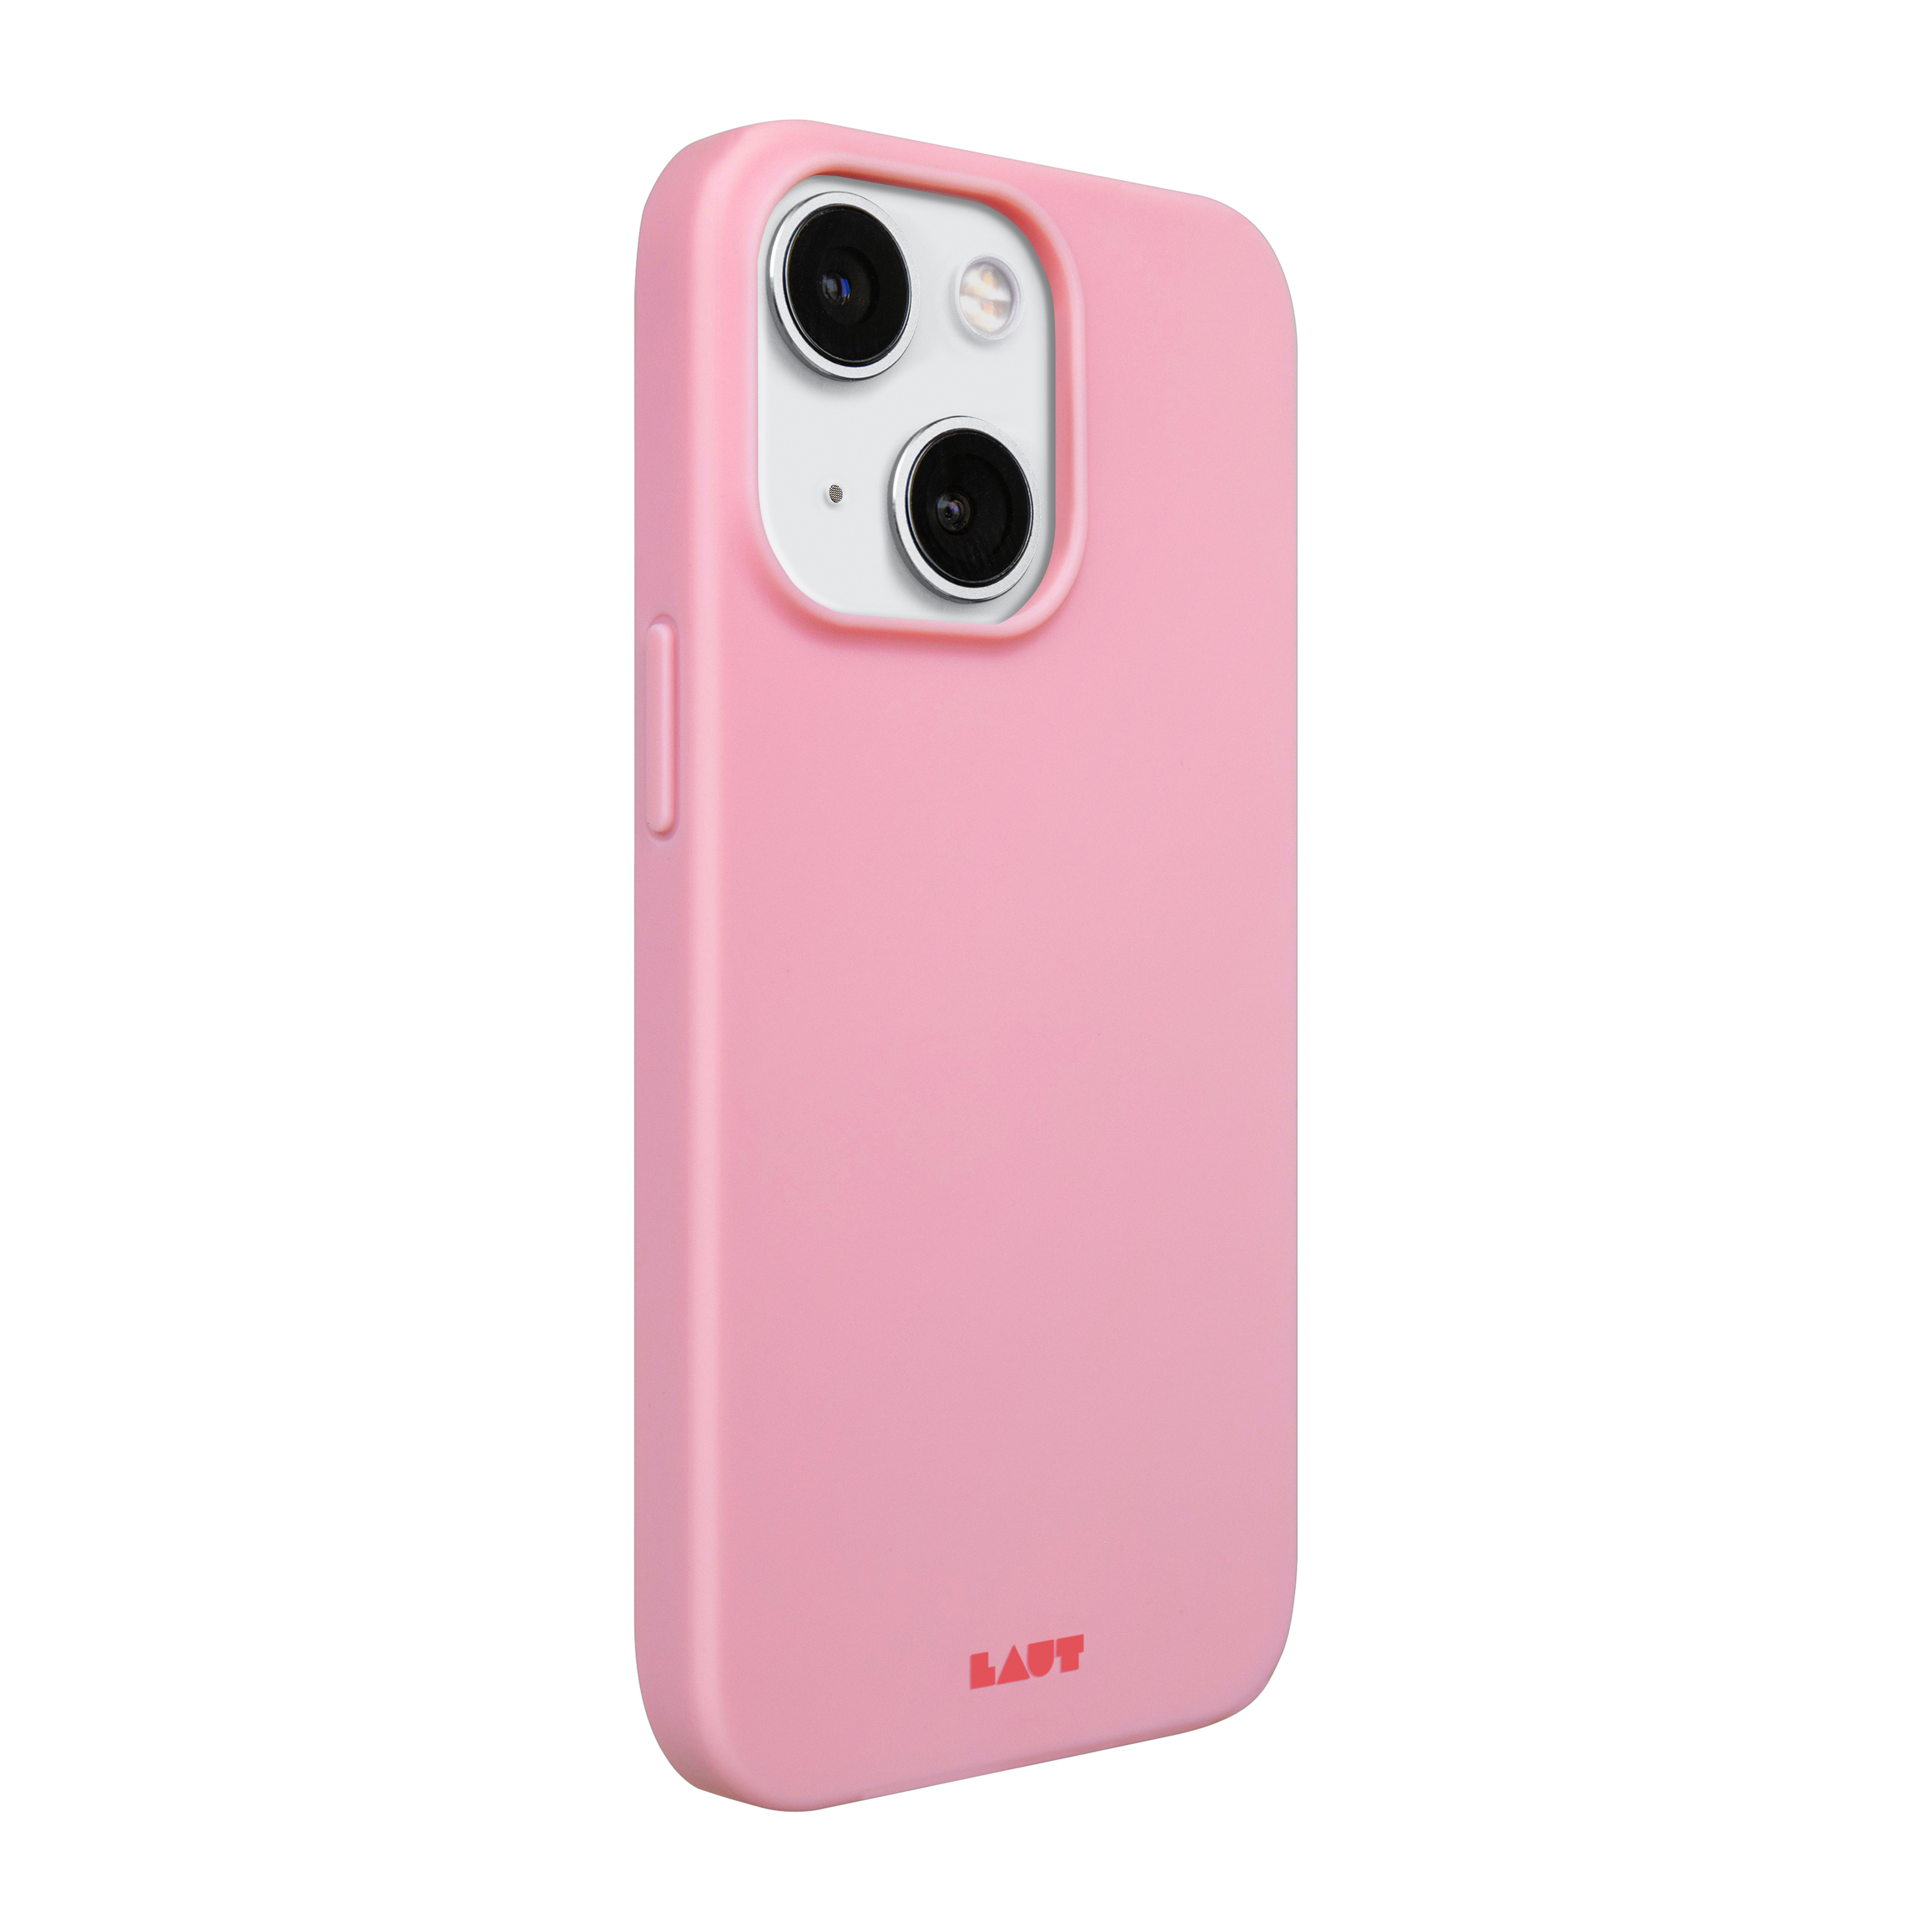 Backcover, Pastels, Huex LAUT APPLE, 14, PINK IPHONE